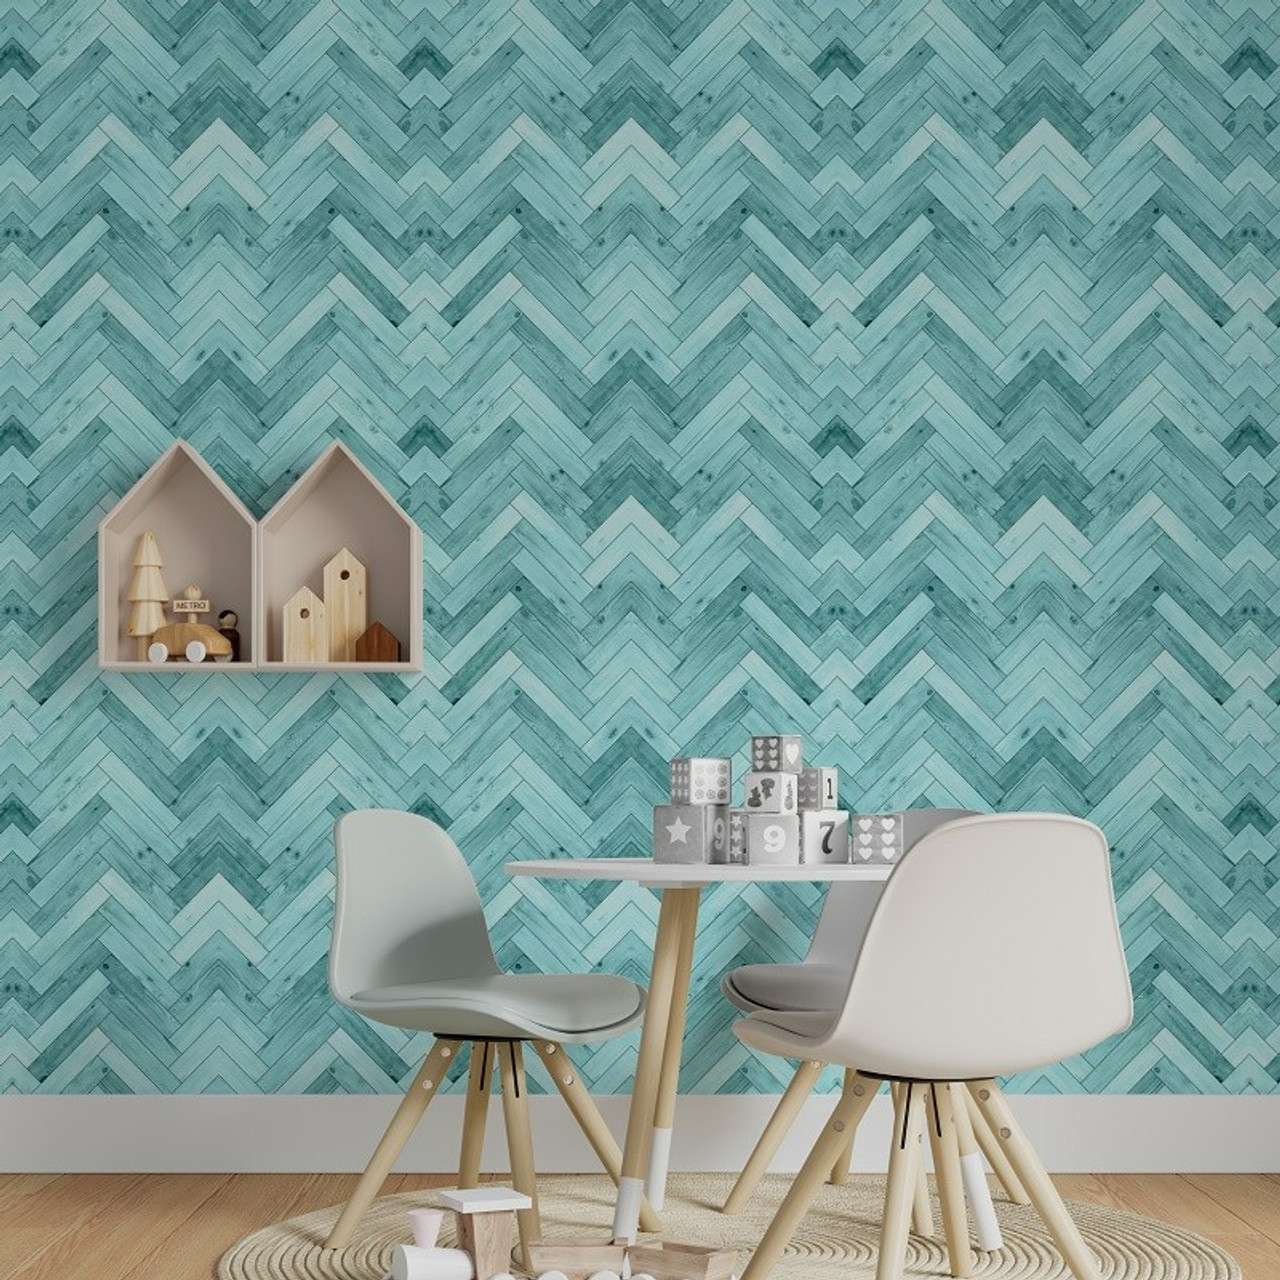 Buy Removable Wallpaper Turquoise Tangle Wave Self Adhesive Vinyl Online in  India  Etsy